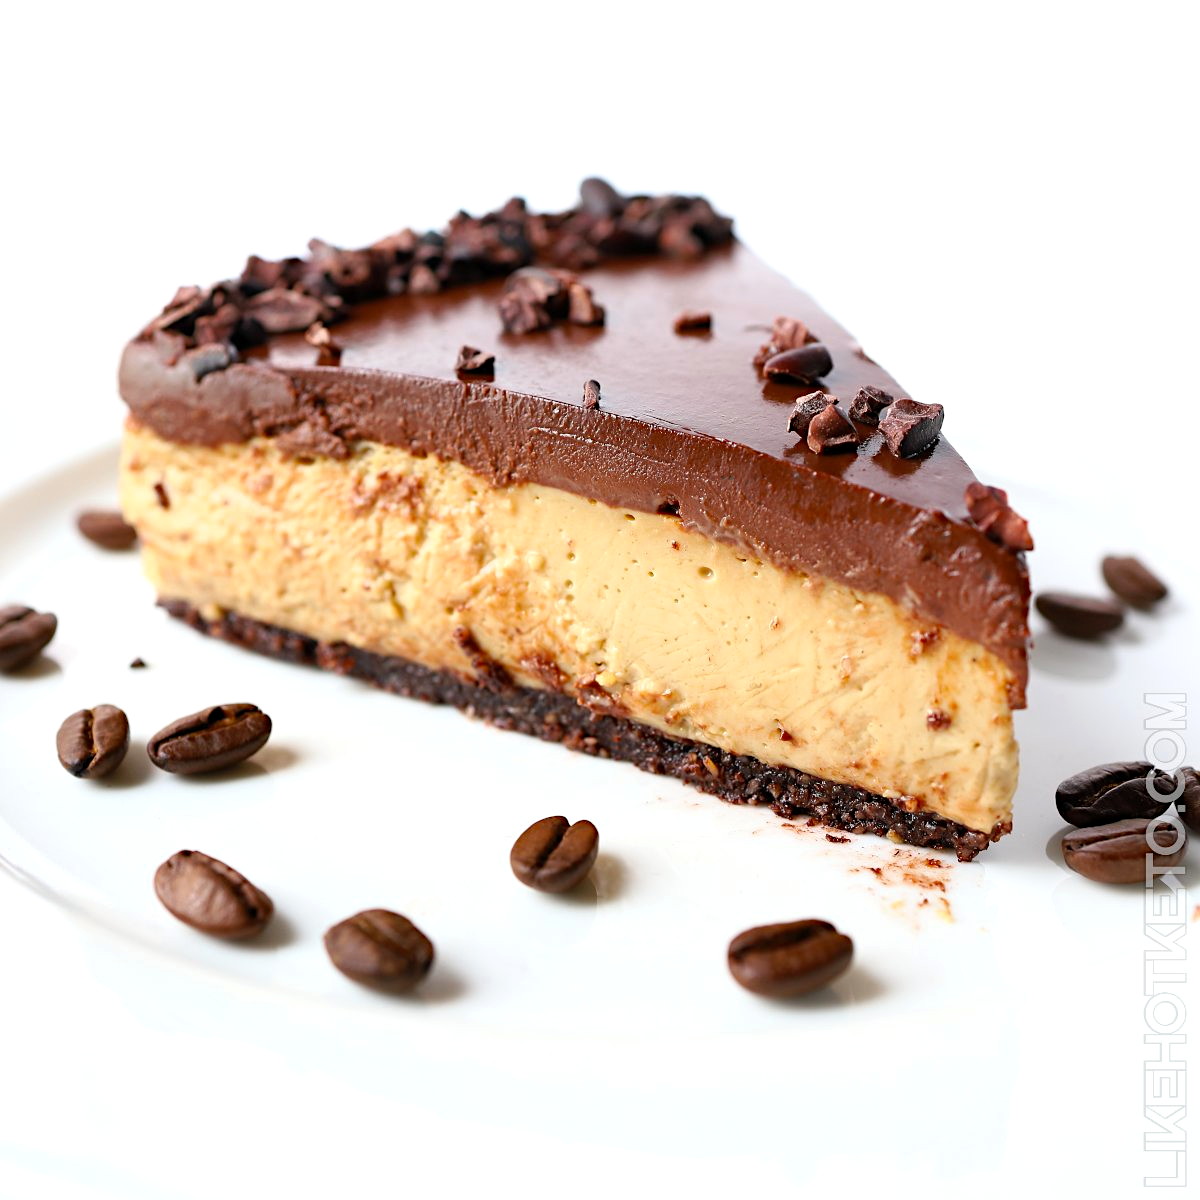 Slice of keto mocha no-bake cheesecake topped with a thick layer of chocolate ganache, decorated with cacao nibs and coffee beans.